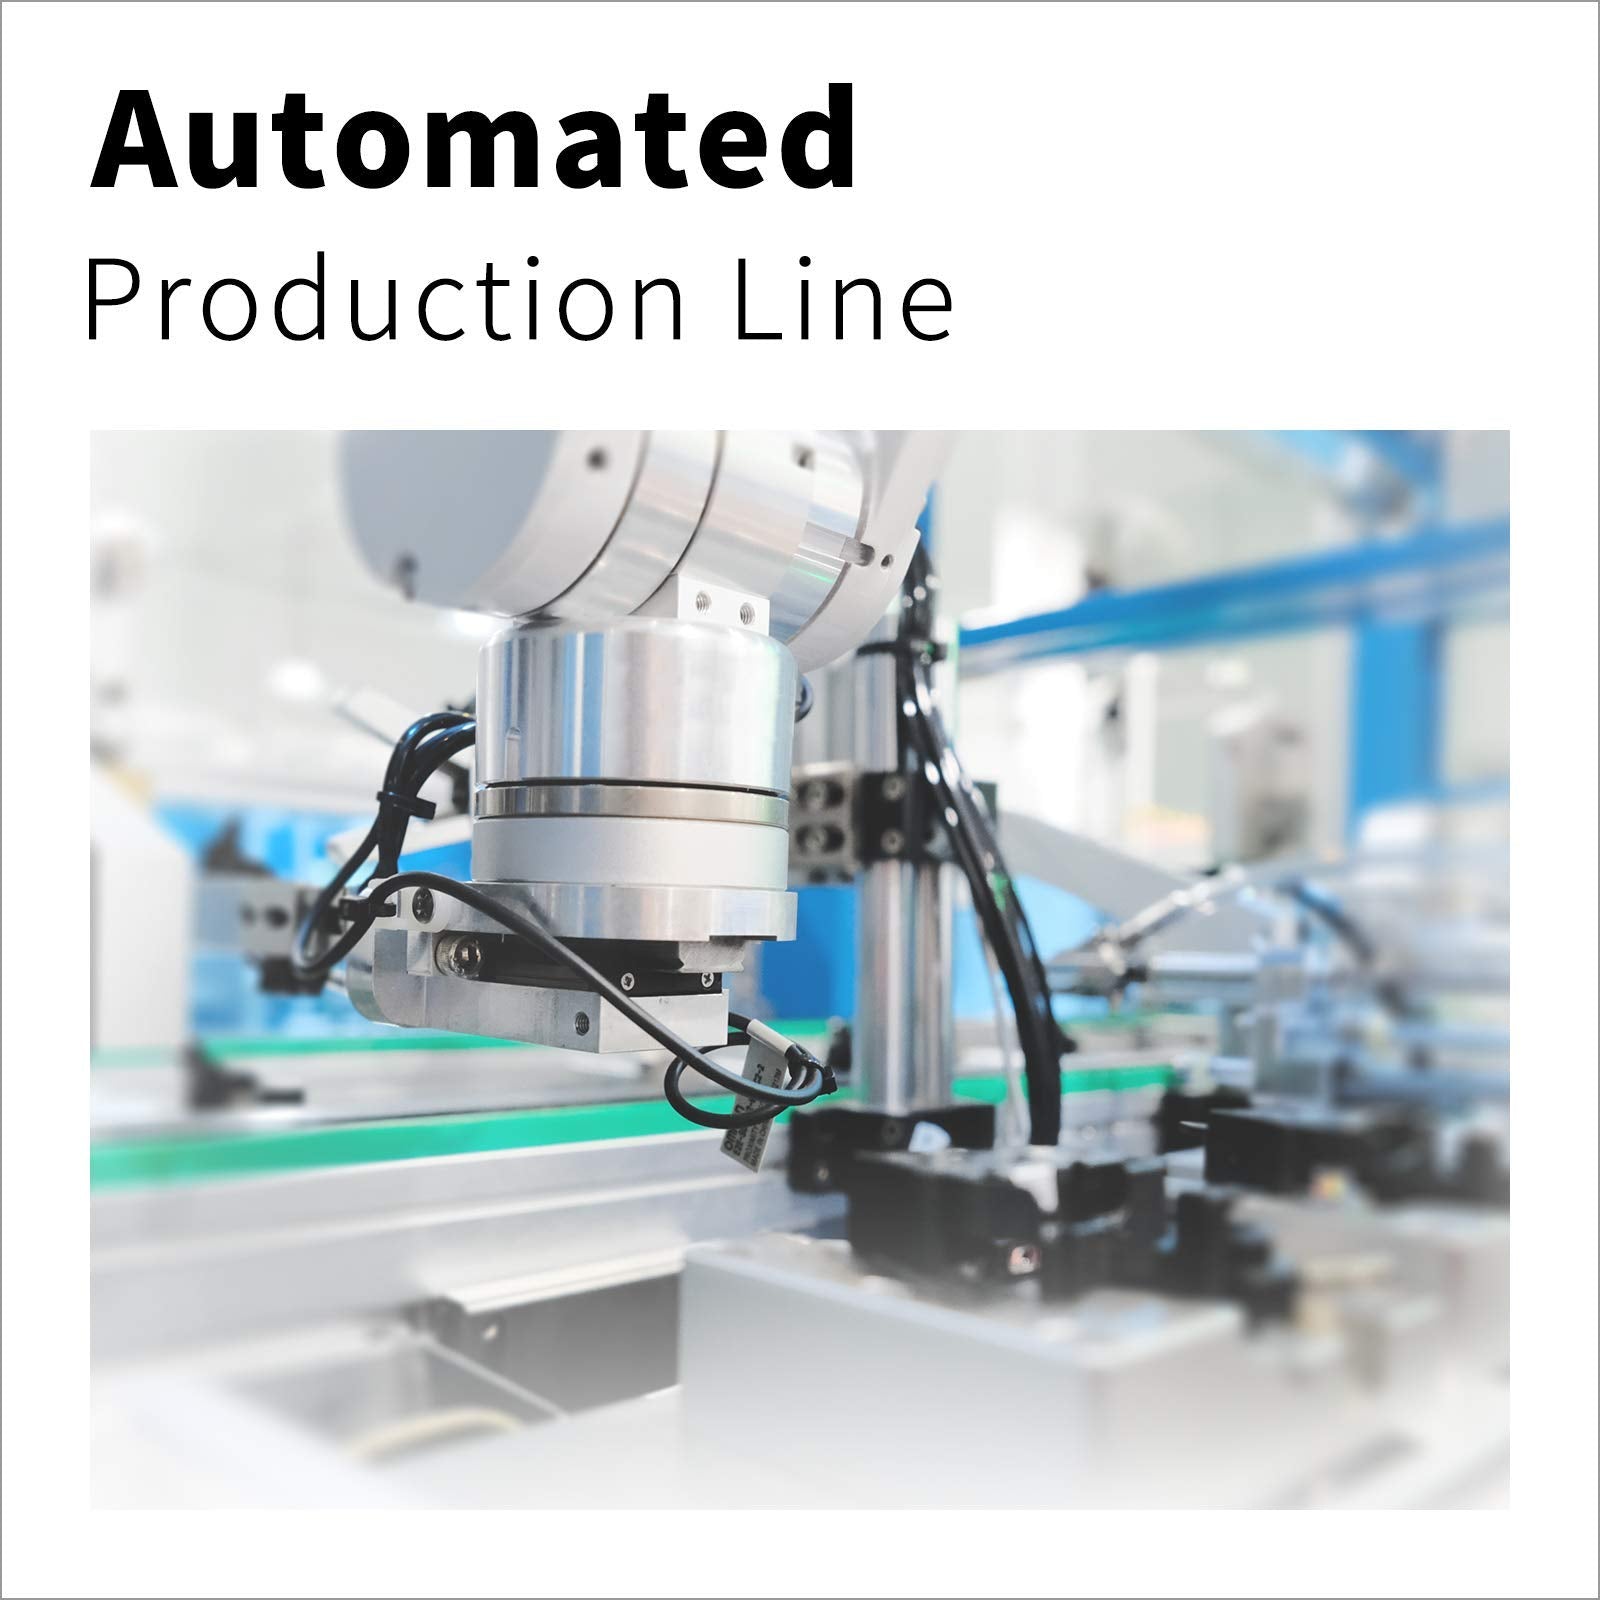 Automated production line for manufacturing HP 67XL ink cartridges, highlighting precision and quality control in production processes.